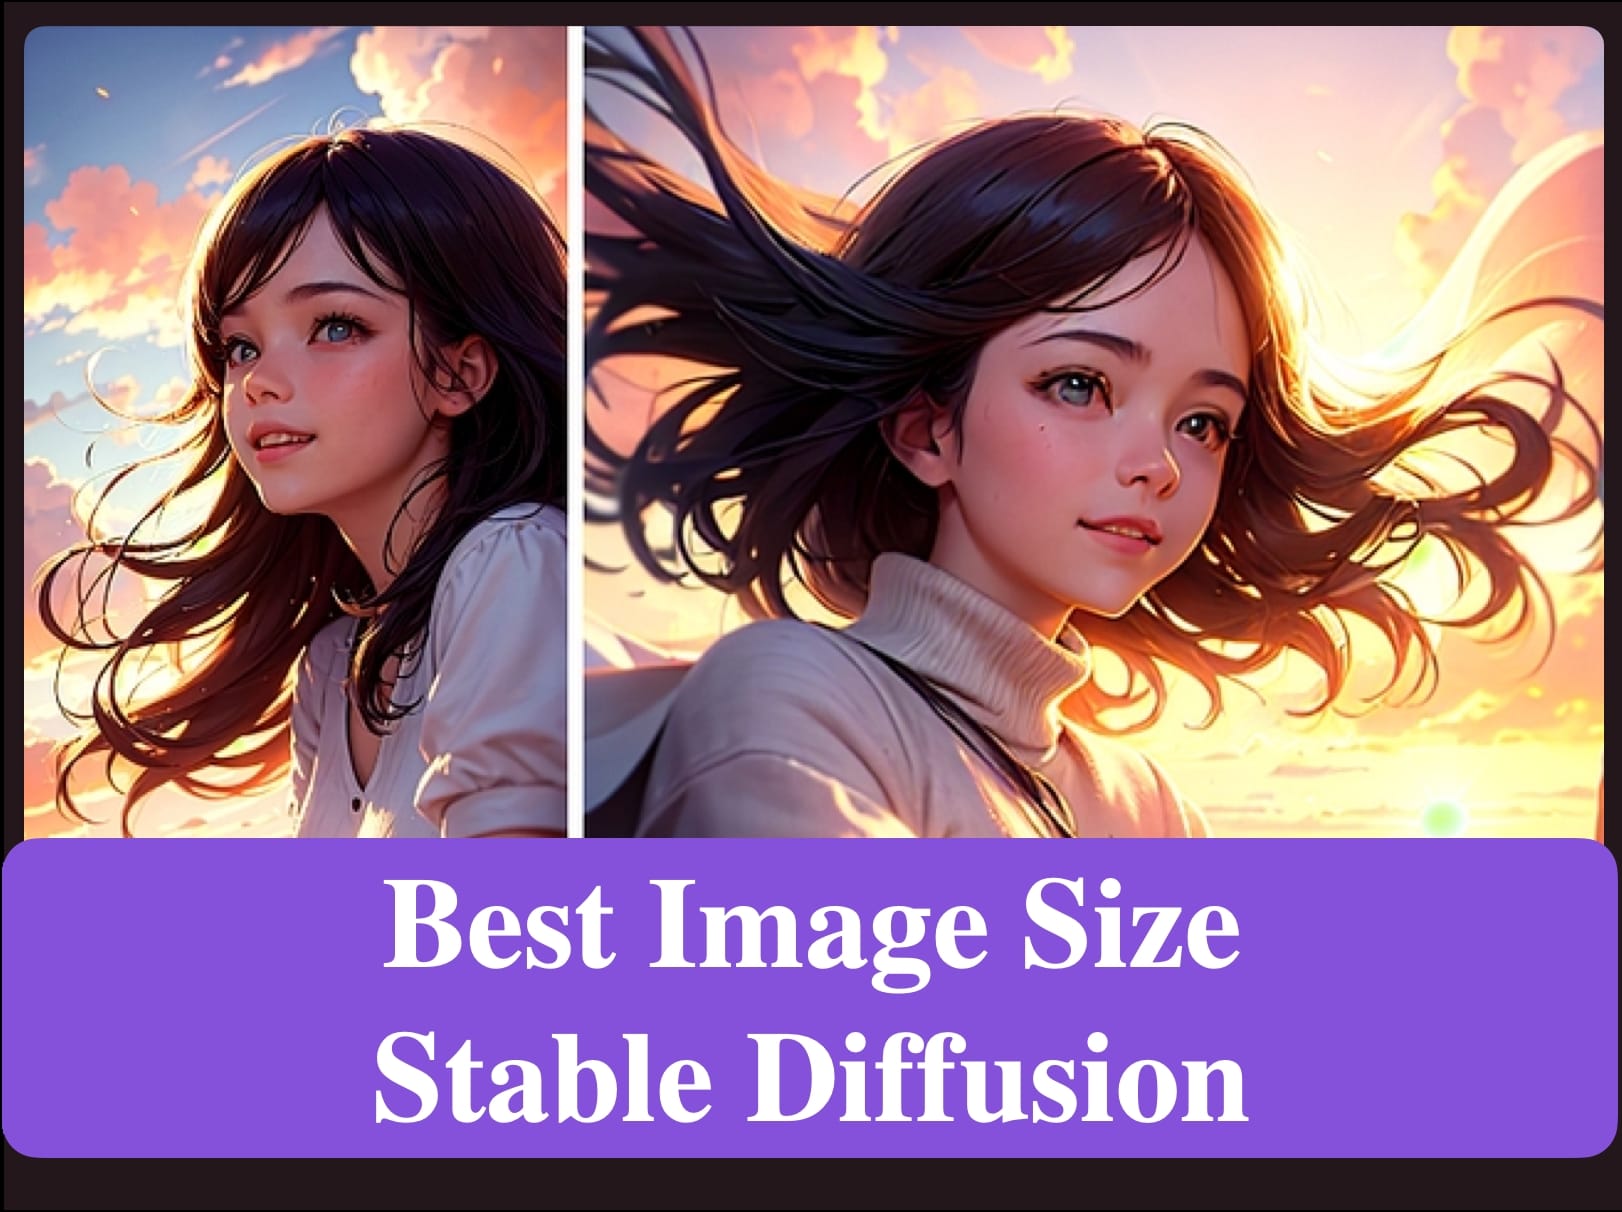 Optimal Image Size for Stable Diffusion